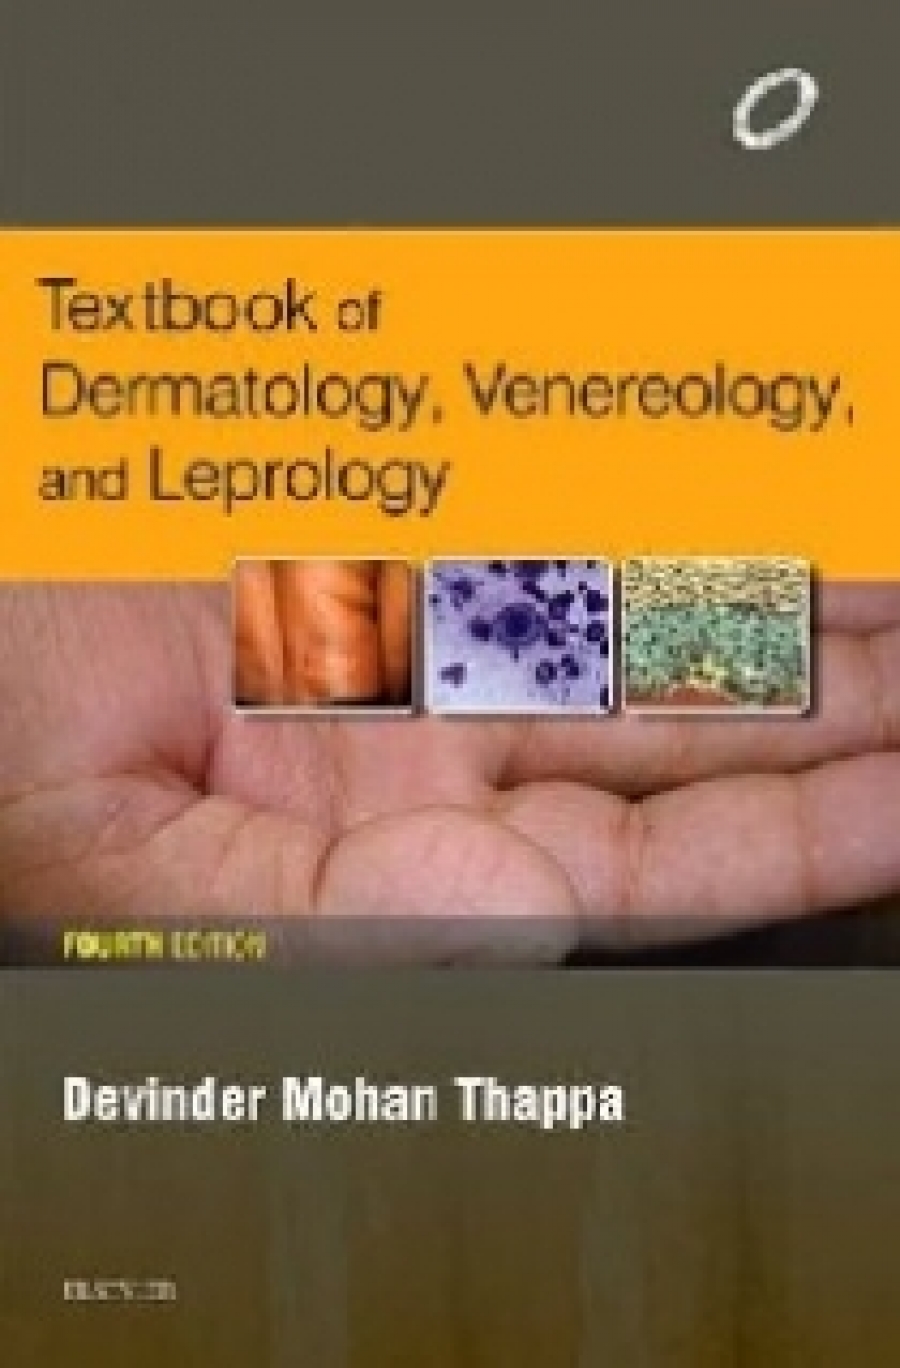 Thappa Devinder Mohan Textbook of Dermatology, Venerology and Leprology, 4th ed. 